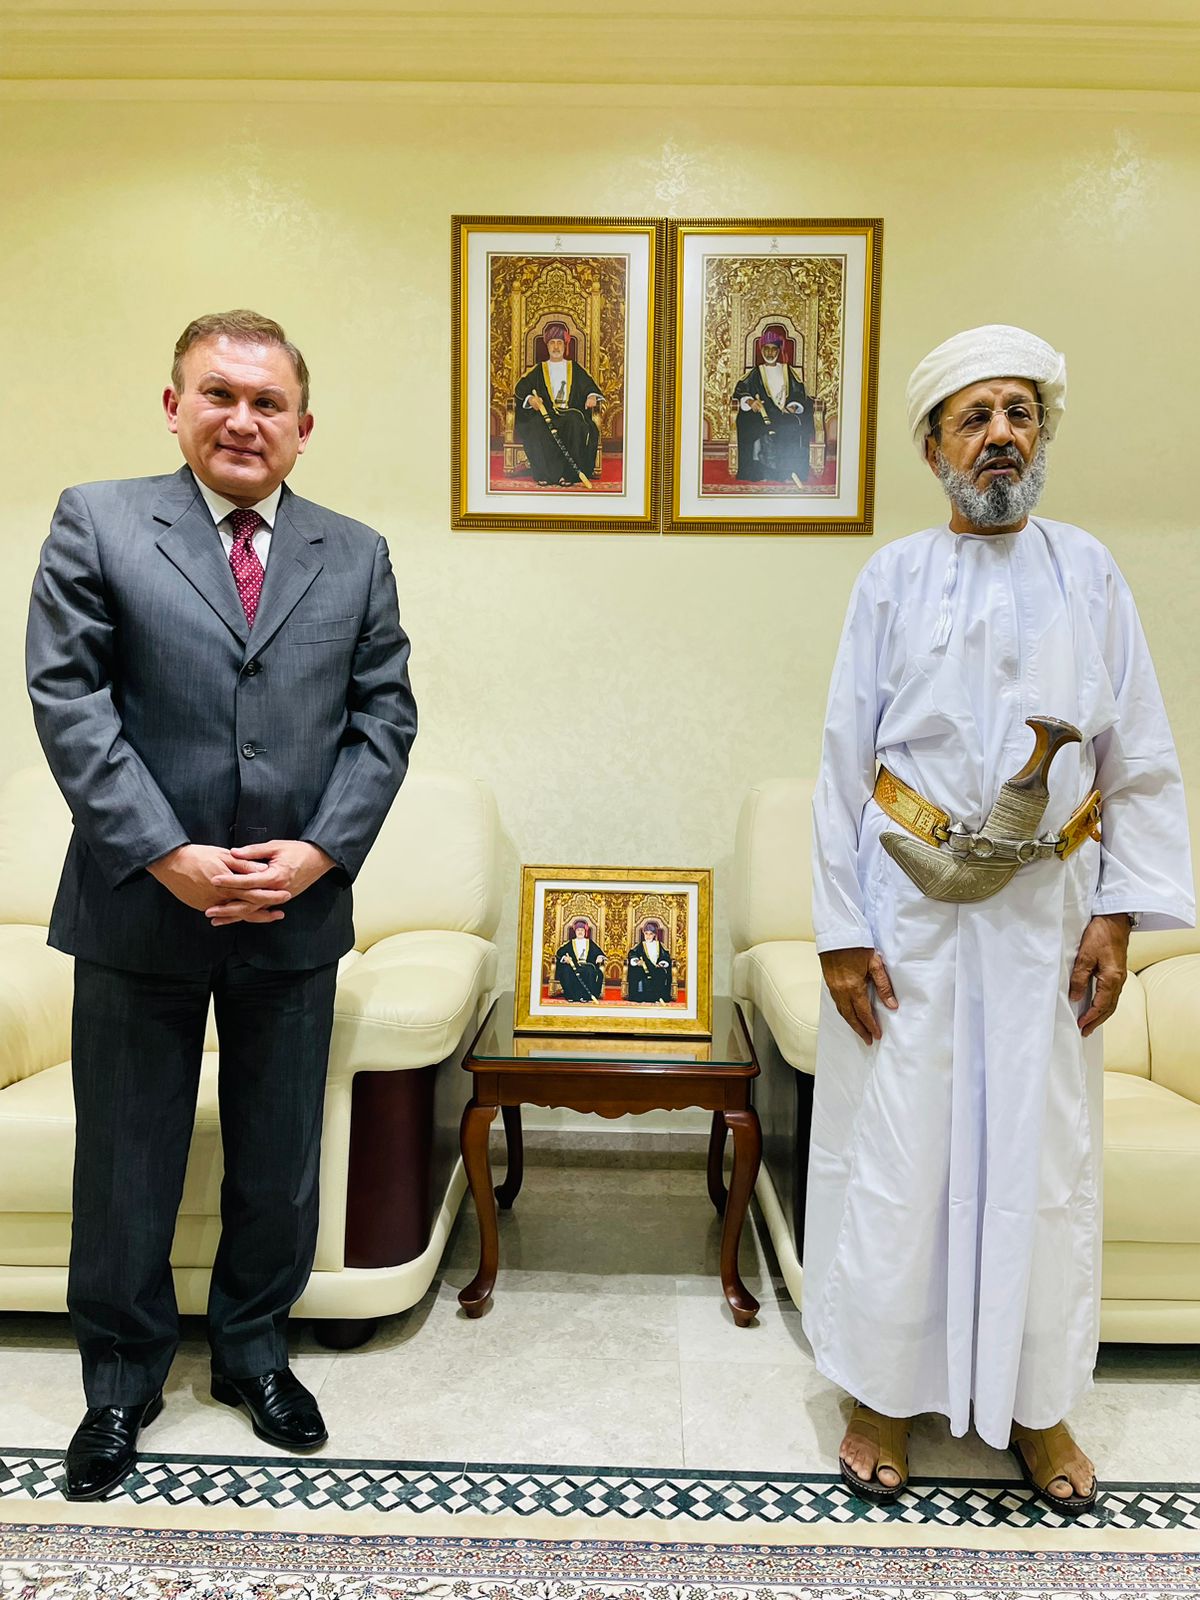 VII Congress of Leaders of World and Traditional Religions discussed in Muscat